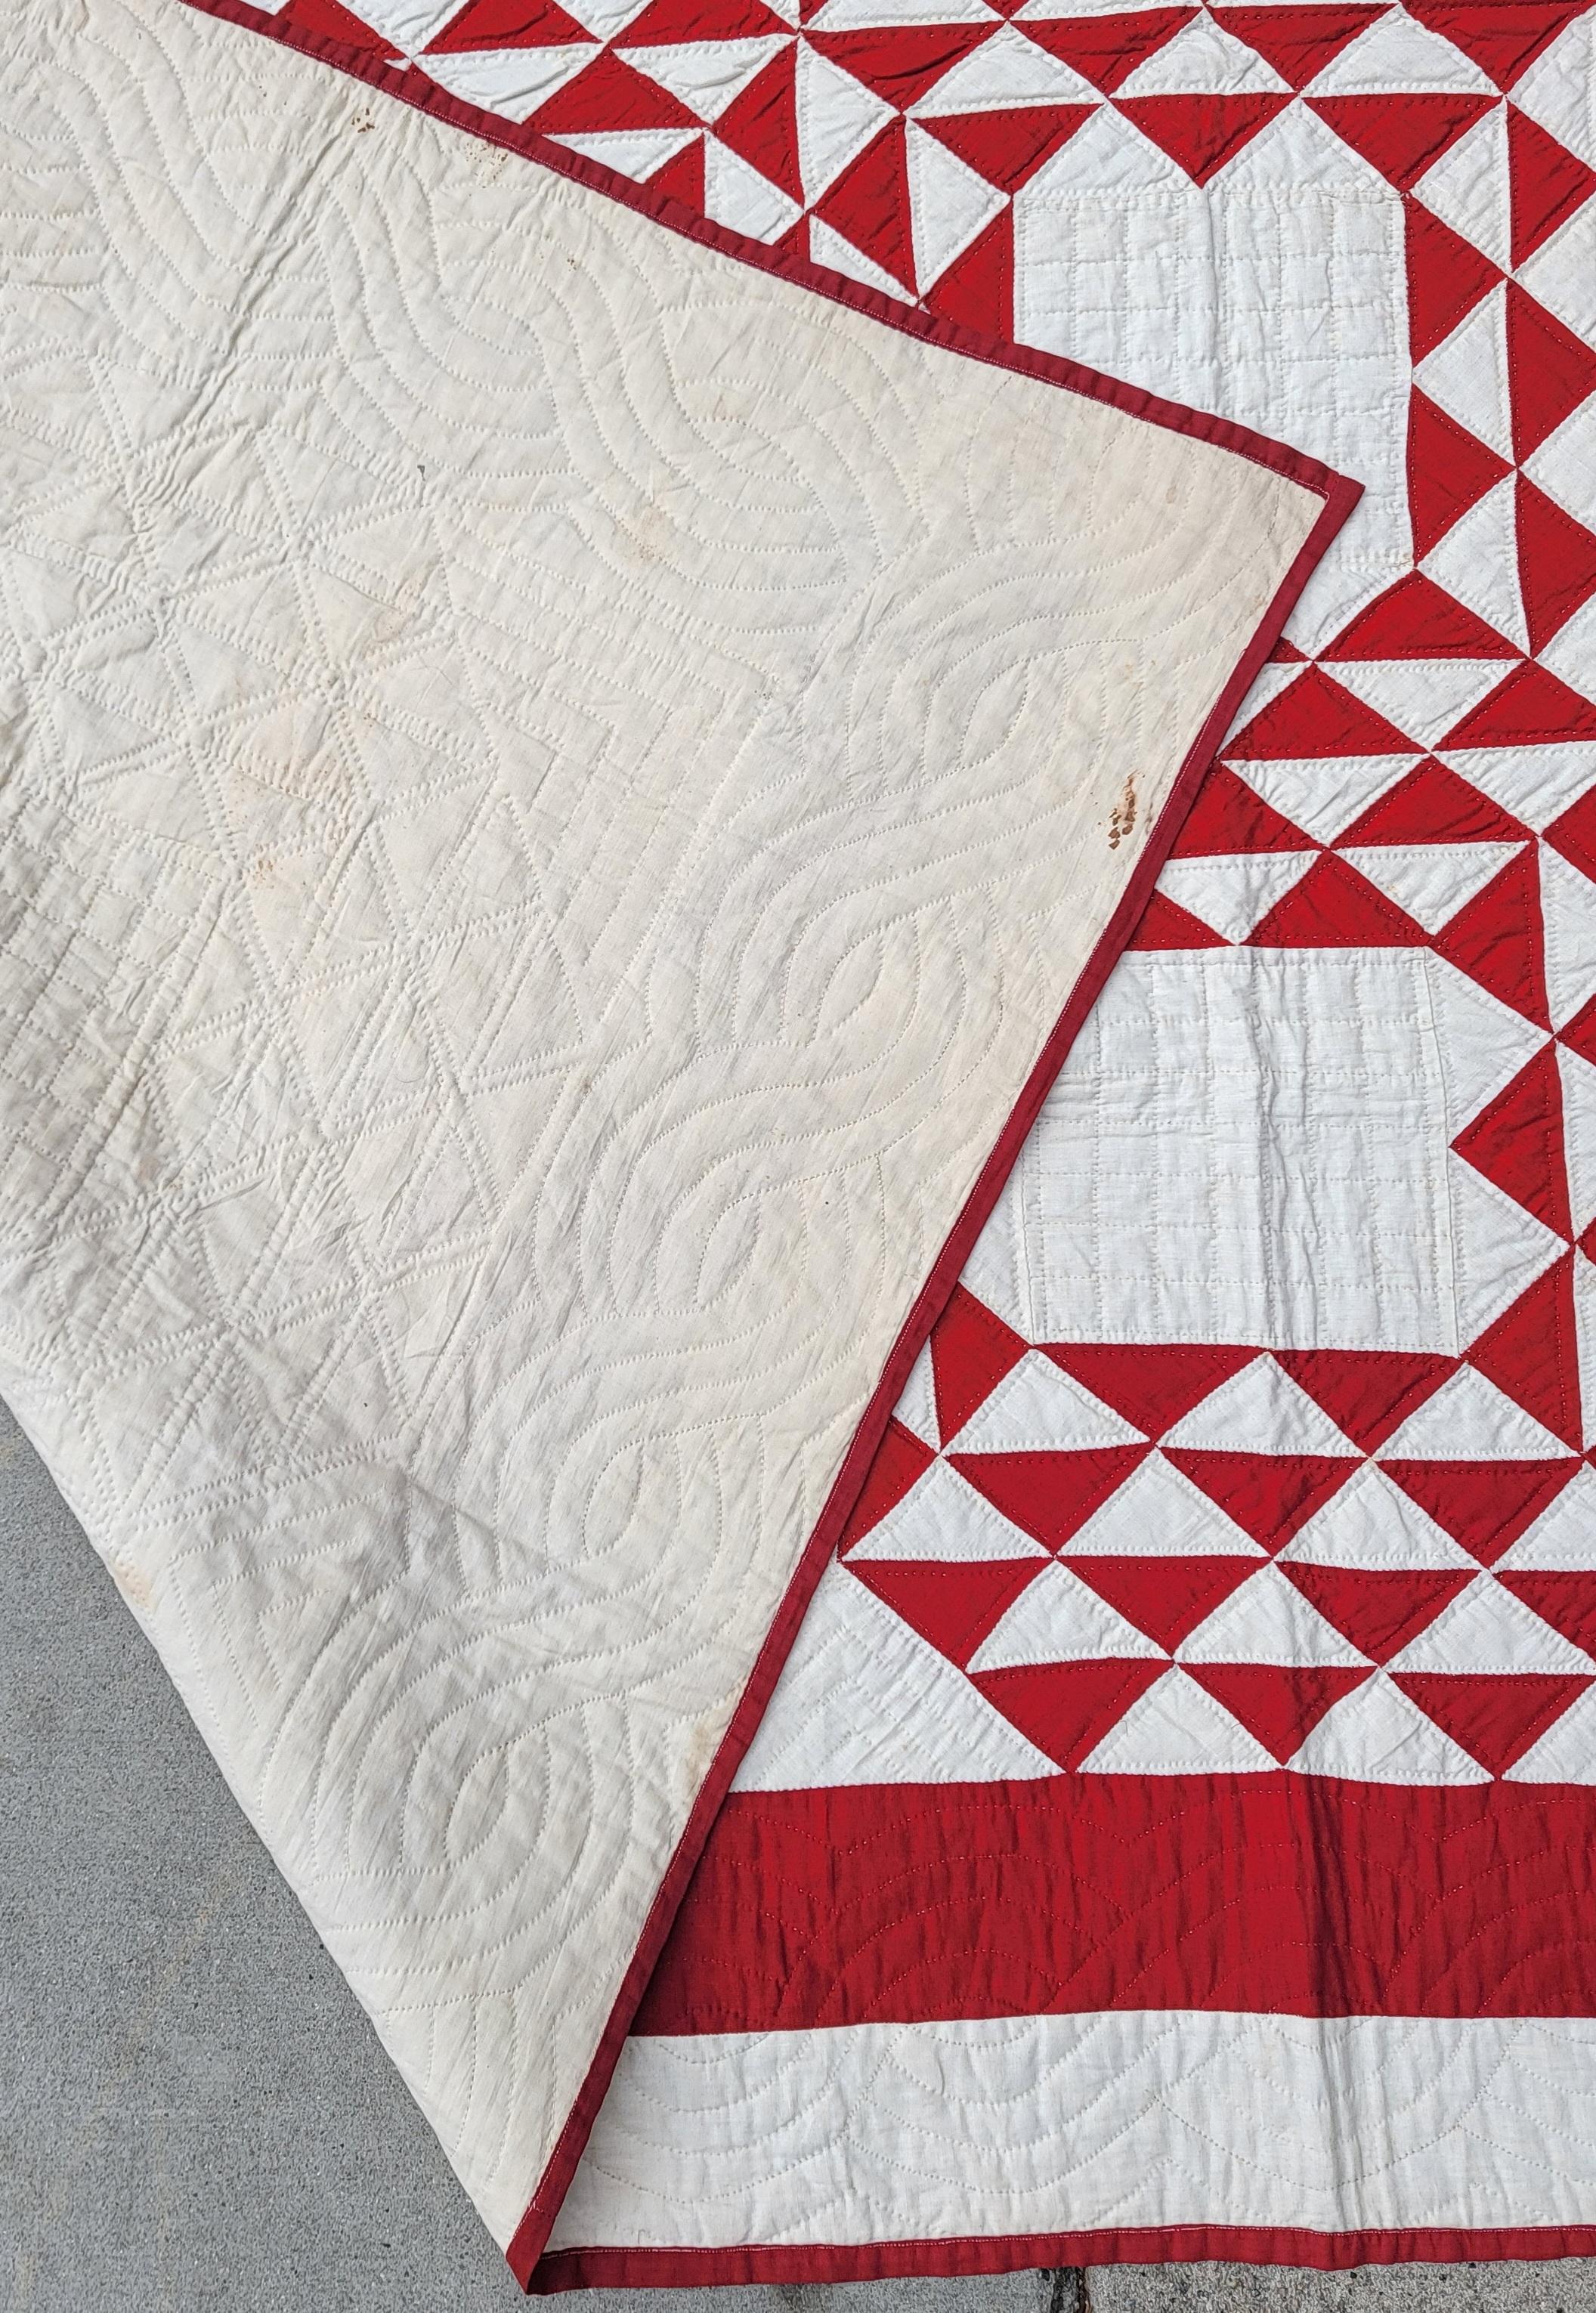 This finely quilted and pieced ocean waves is in pristine condition. This fine quilt has a inner border and is finely pieced. This quilt was found and made in Lancaster County, Pennsylvania.